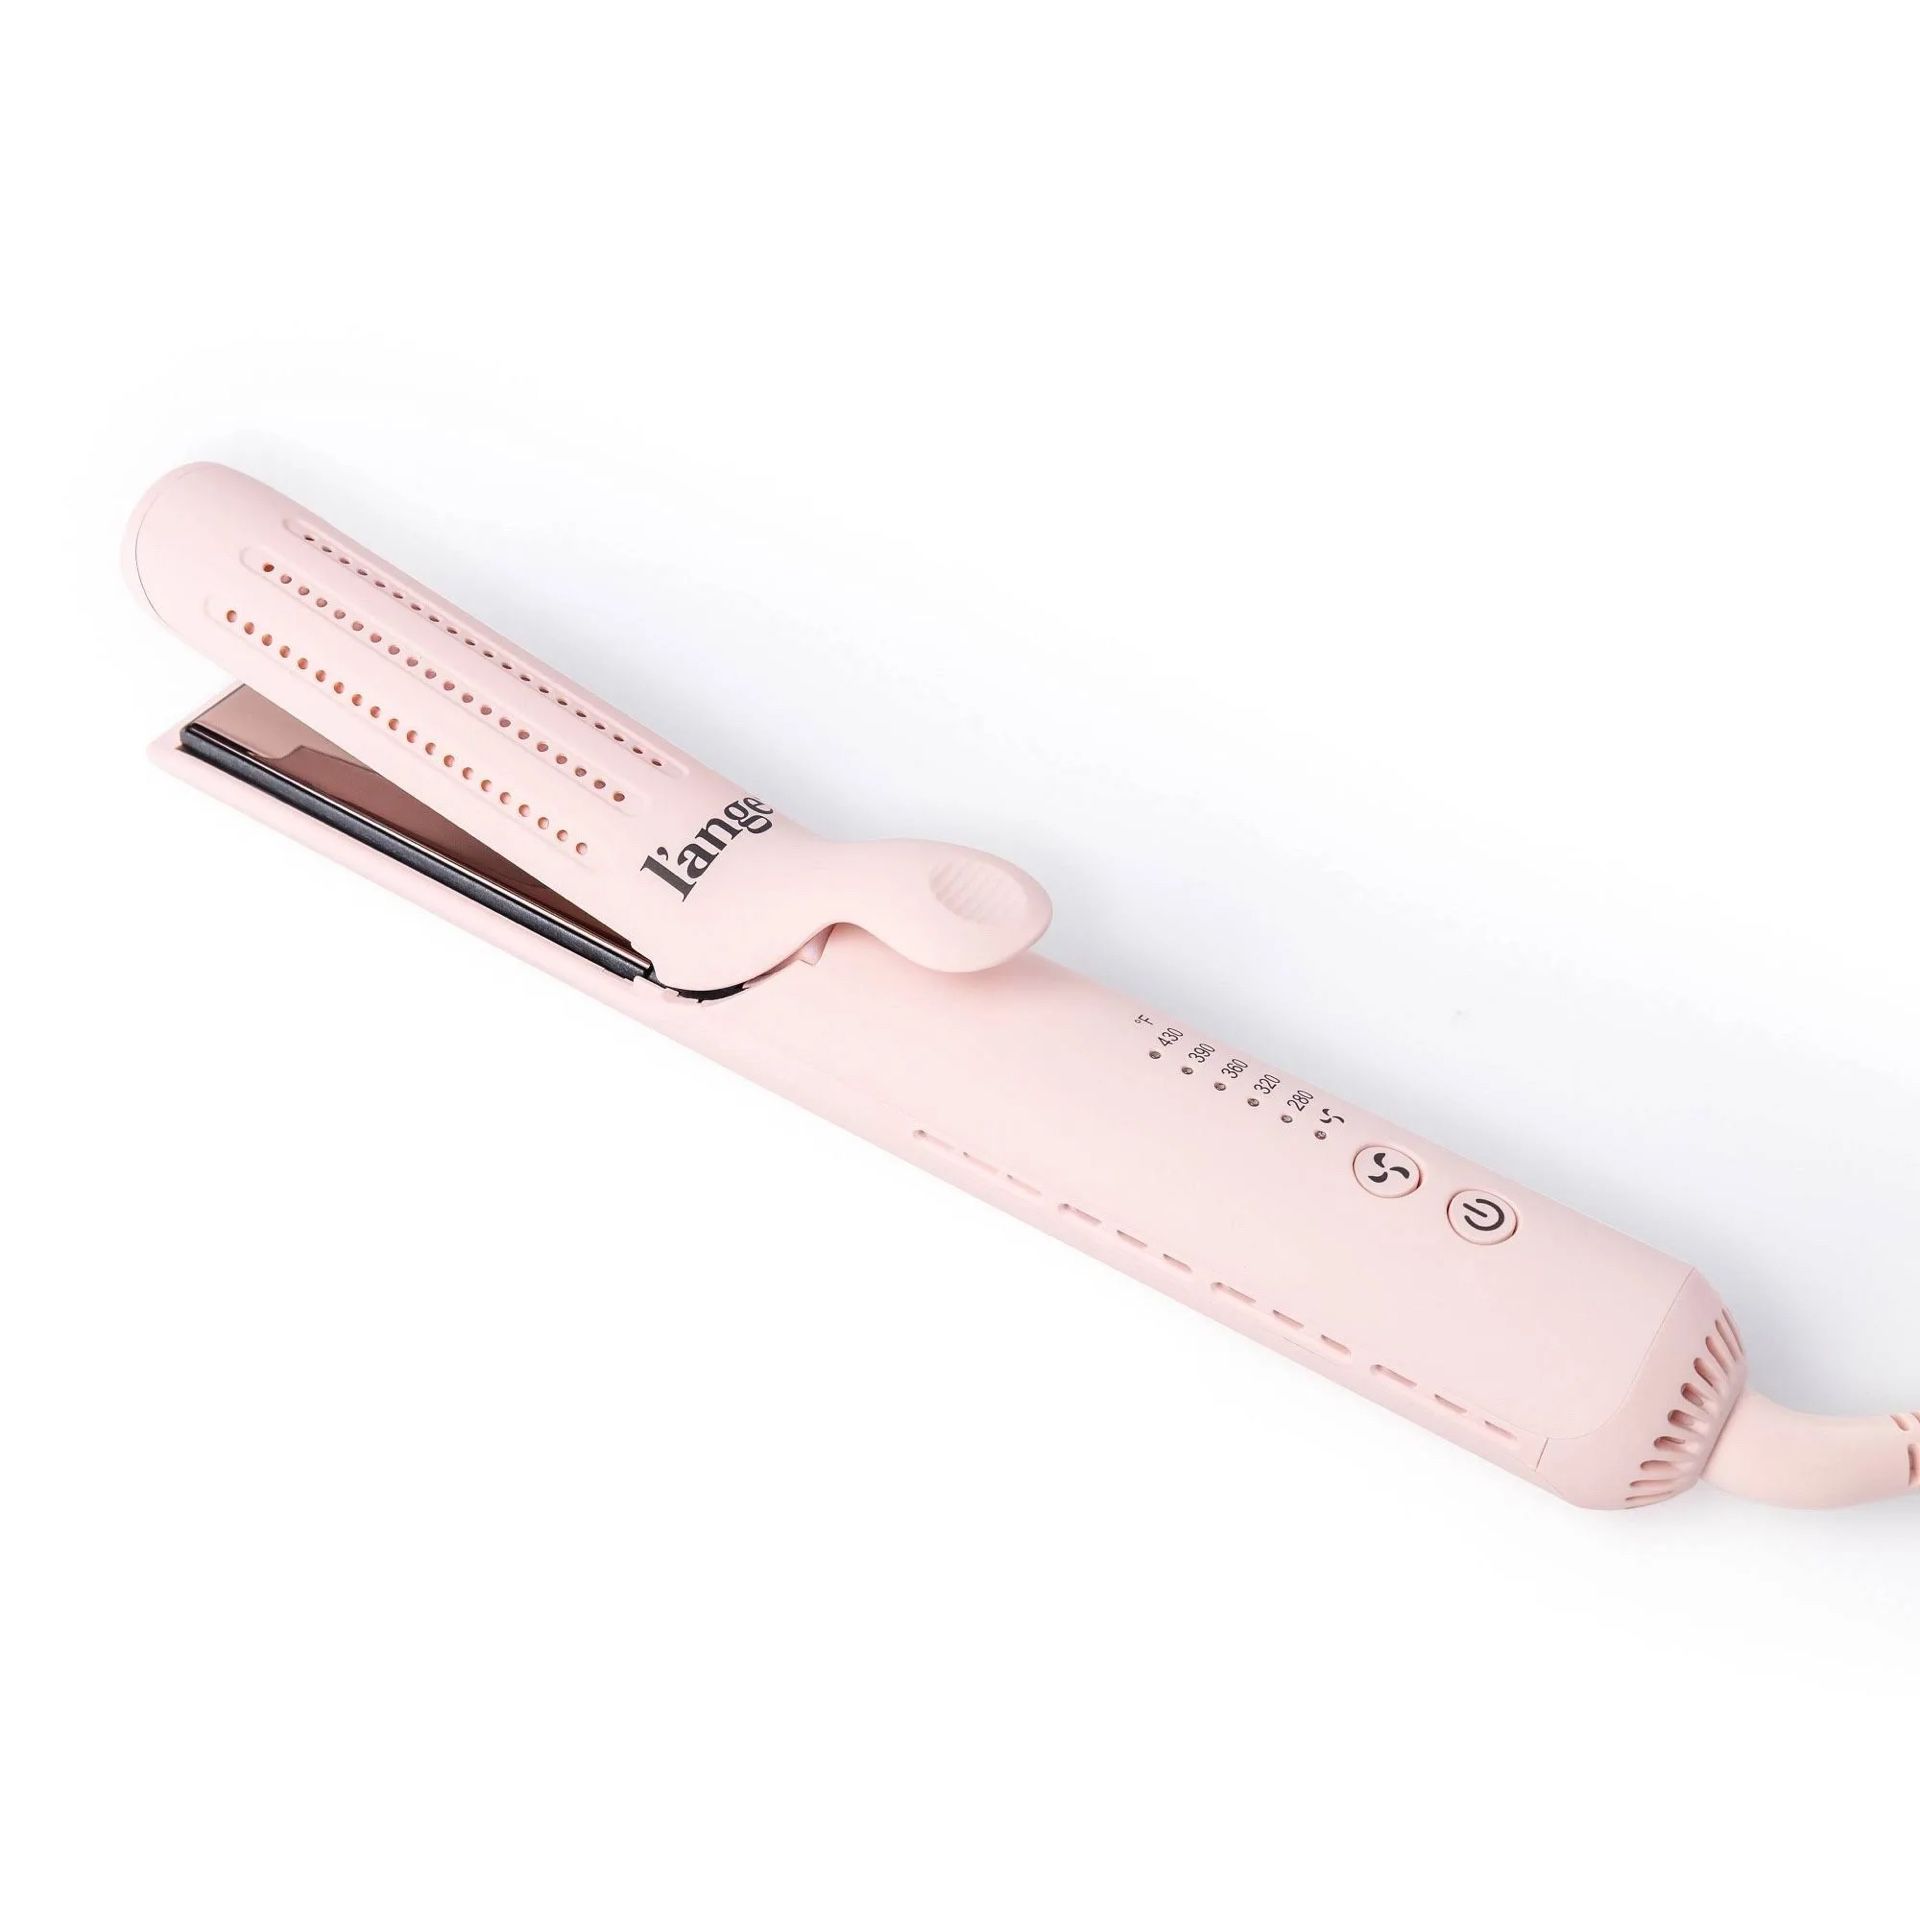 L'ange Hair Le Duo 360 Airflow Styler 2-in-1 Curling Wand & Titanium Flat Iron Hair Straightener